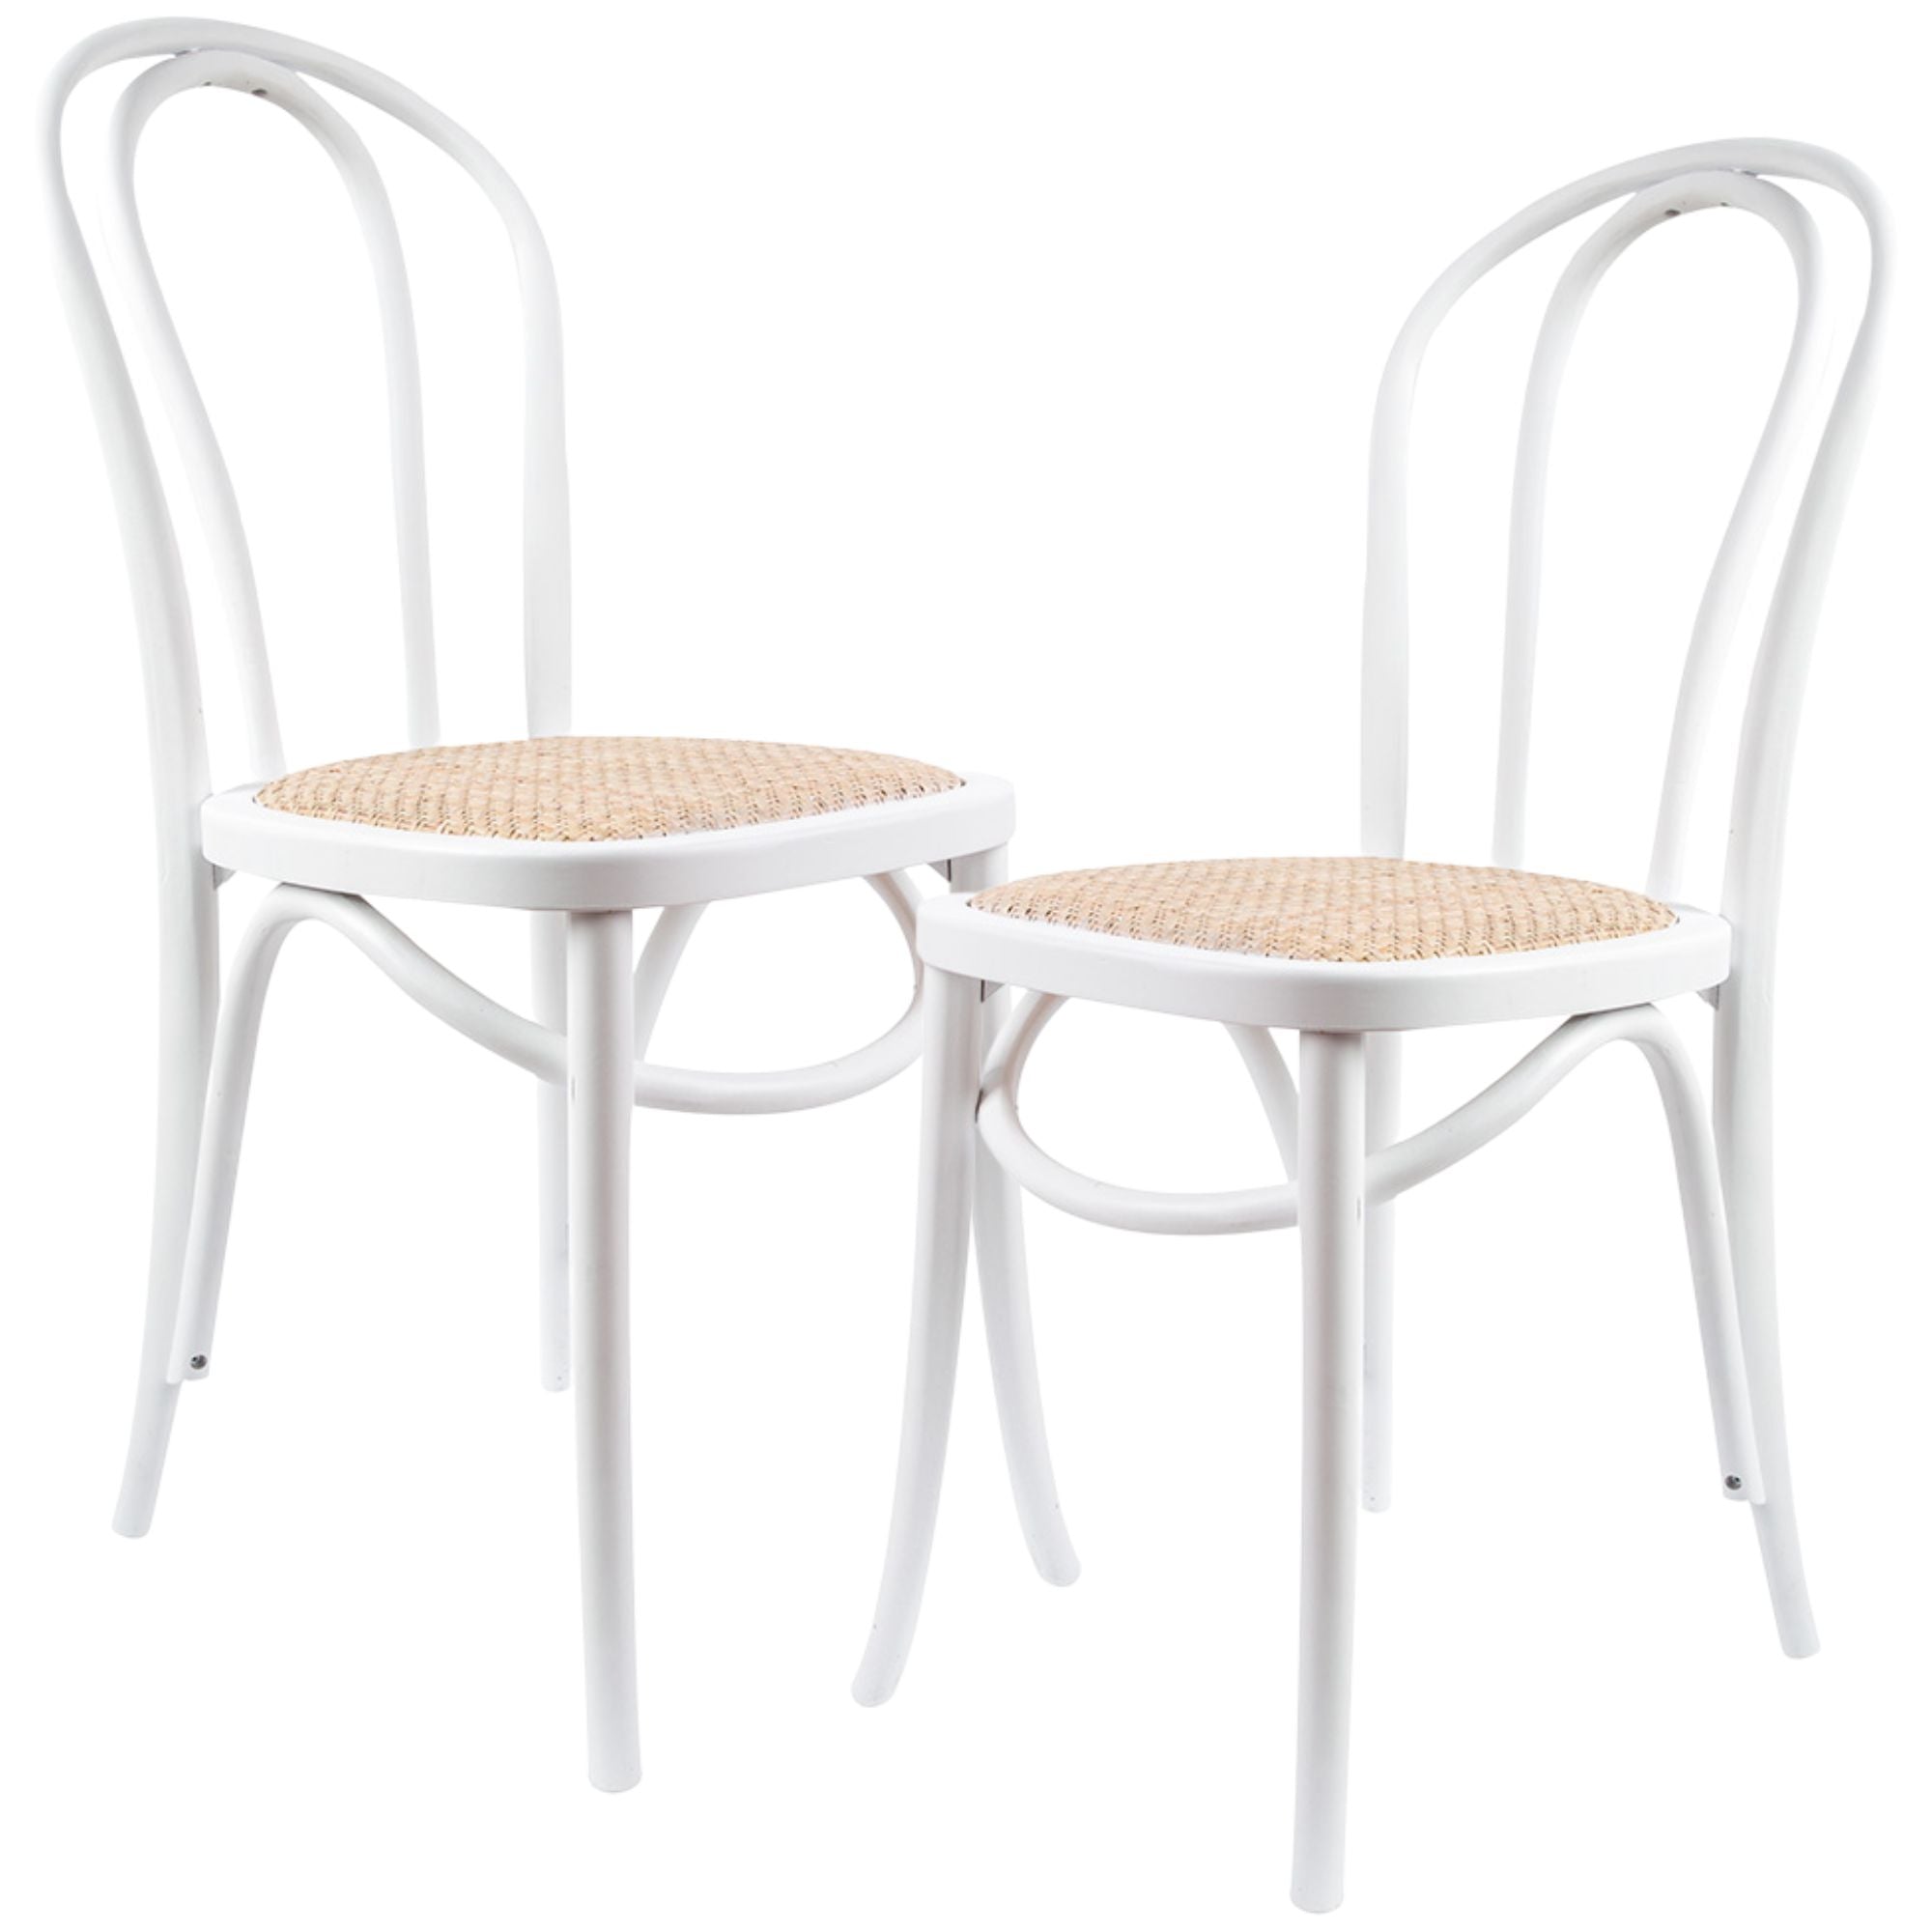 Azalea Arched Back Dining Chair 2 Set Solid Elm Timber Wood Rattan Seat - White